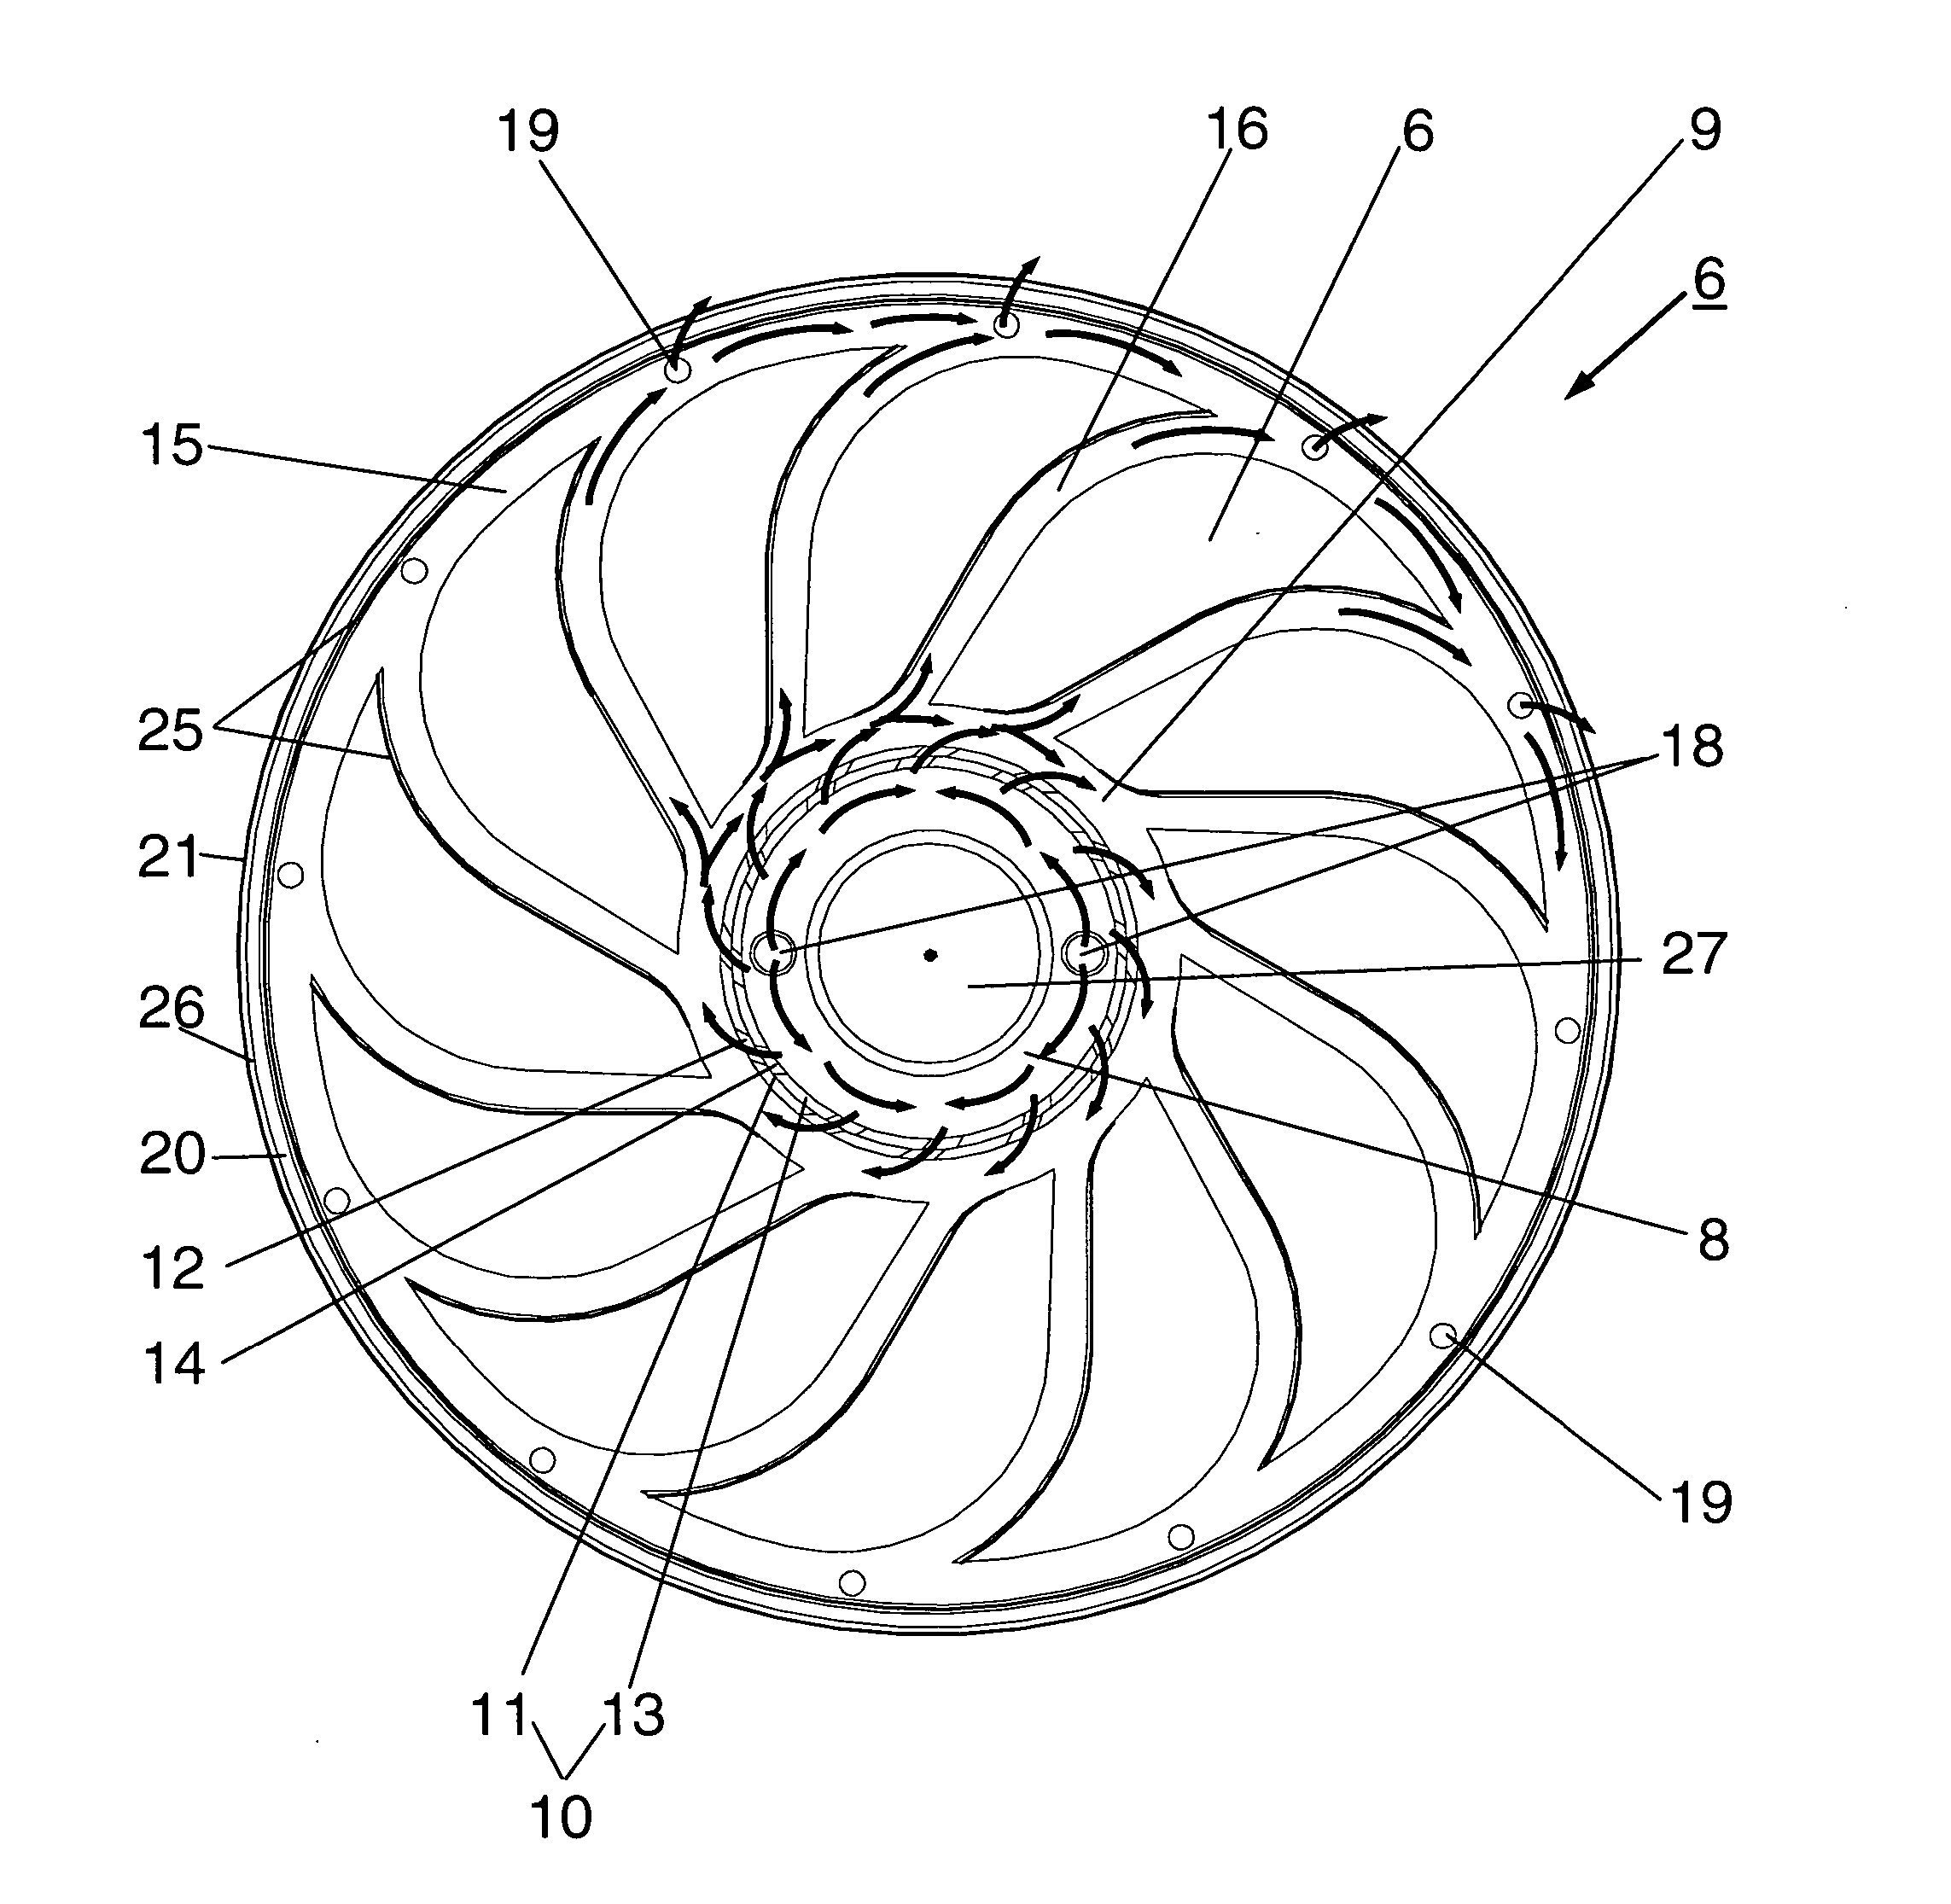 Method and apparatus for coating or heat treatment of blisks for aircraft gas turbines